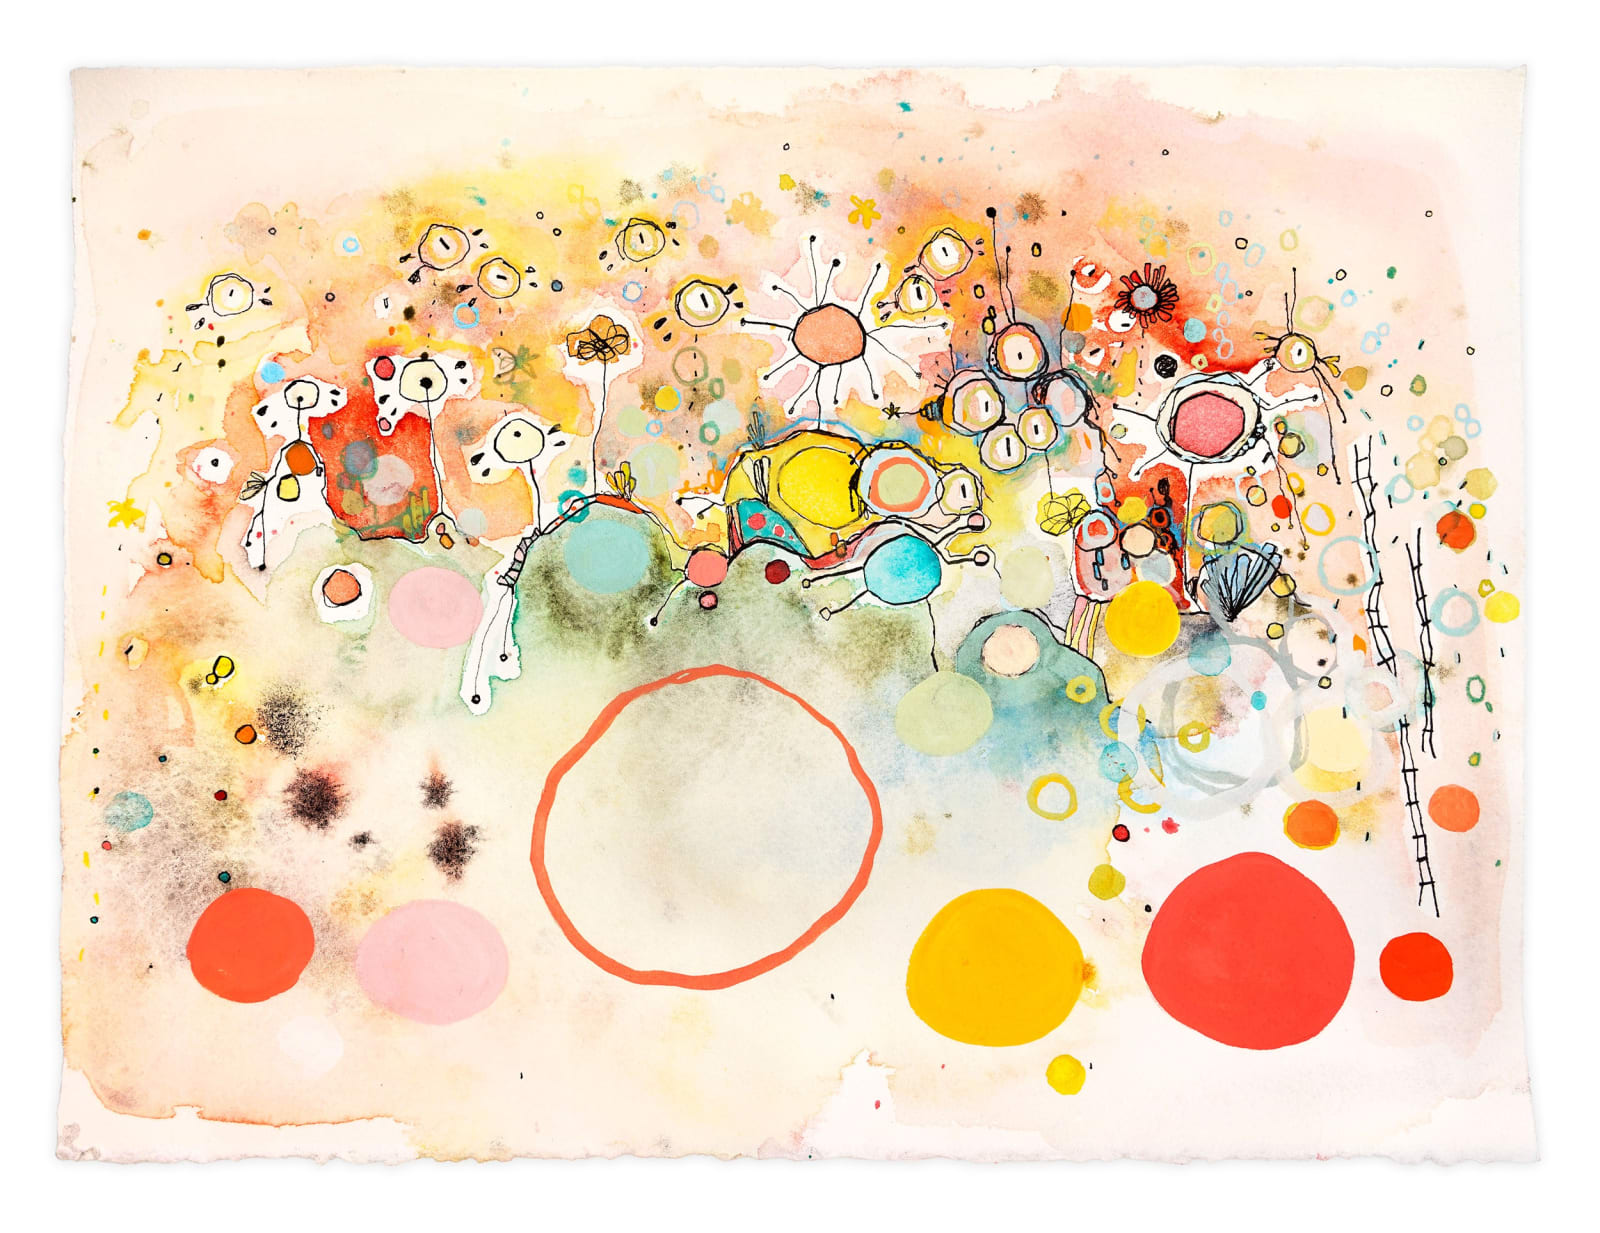 Clara Fialho. Untitled #384, 2020. Watercolor, Gouache, and Ink on Paper. 11 × 15 in.